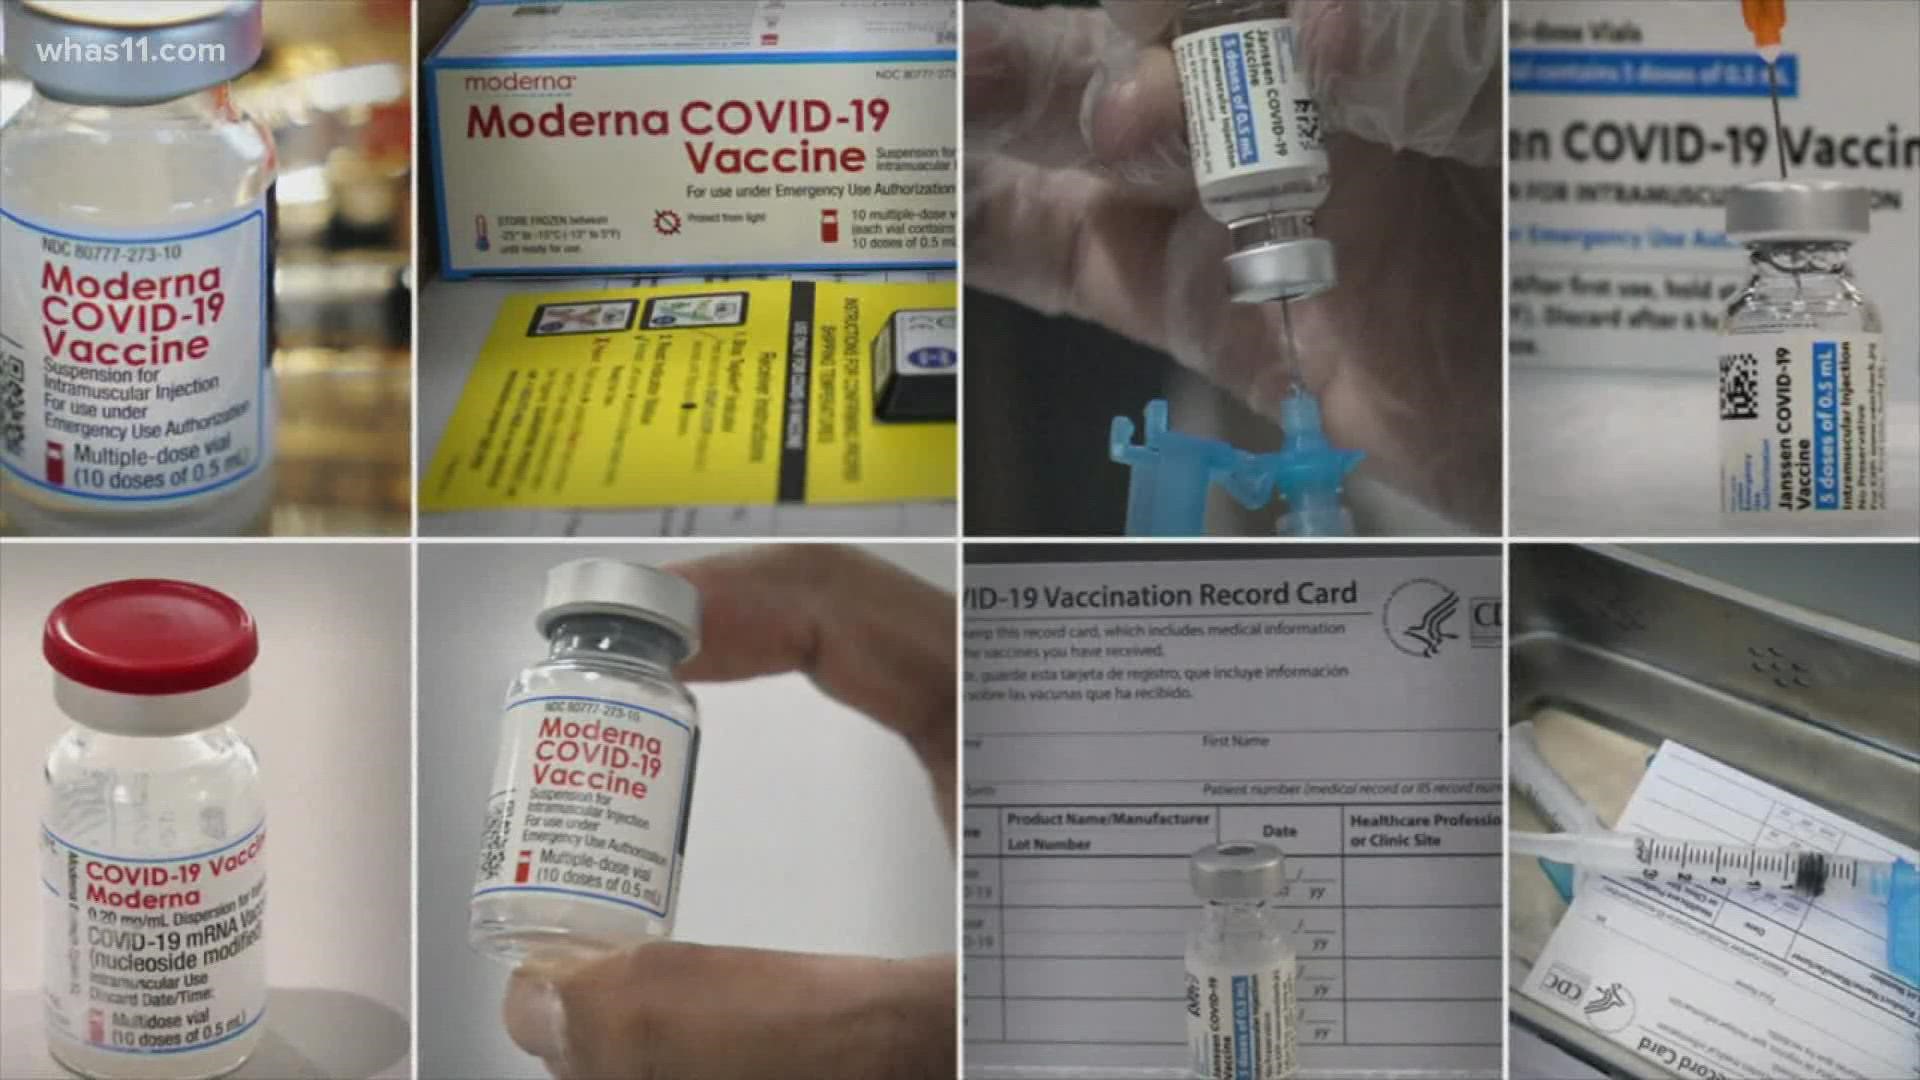 The FDA authorized “mixing and matching” COVID-19 vaccine booster shots of the Johnson & Johnson, Moderna and Pfizer vaccines.